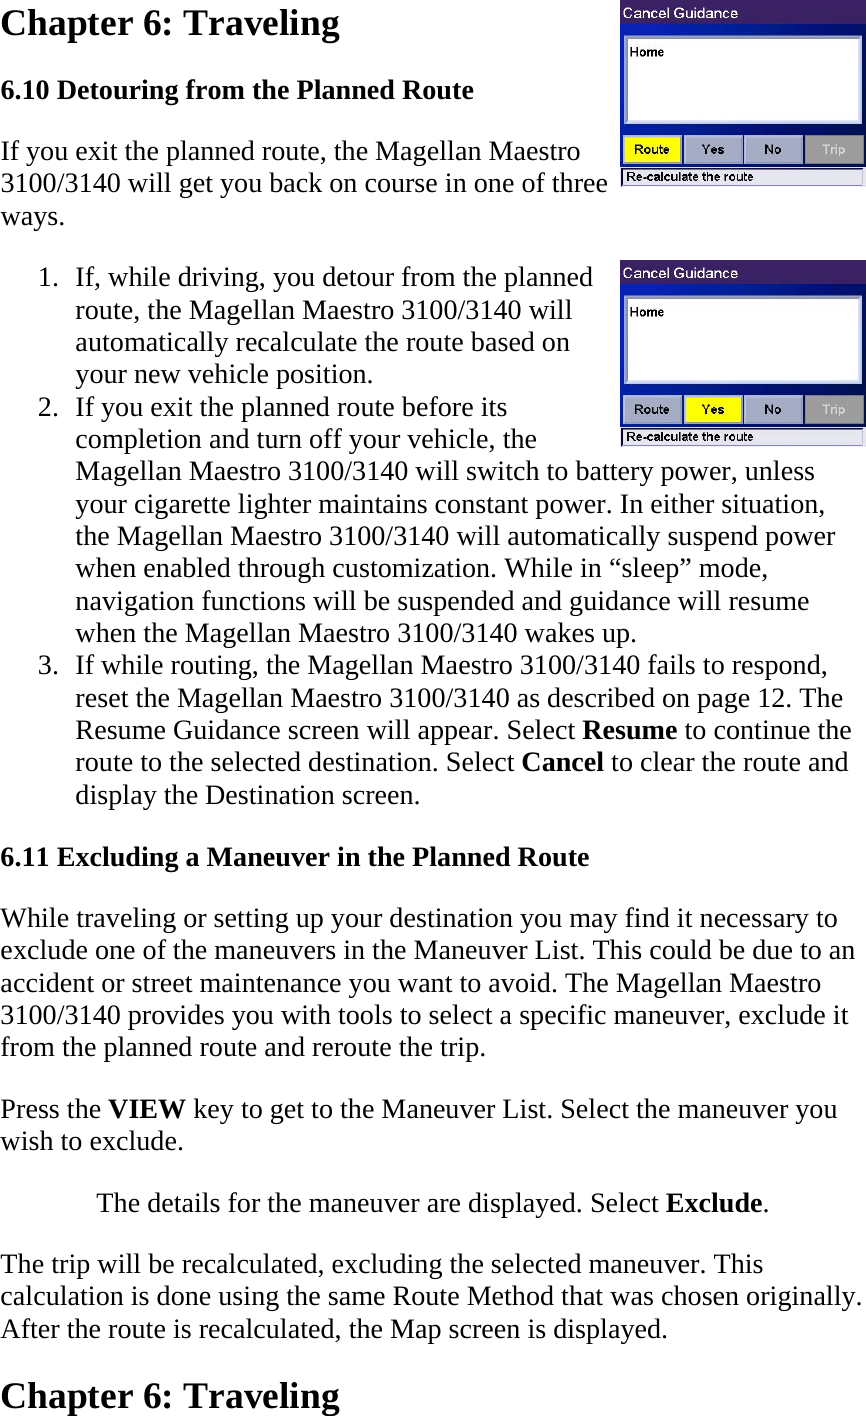 Chapter 6: Traveling  6.10 Detouring from the Planned Route  If you exit the planned route, the Magellan Maestro 3100/3140 will get you back on course in one of three ways.  1. If, while driving, you detour from the planned route, the Magellan Maestro 3100/3140 will automatically recalculate the route based on your new vehicle position.  2. If you exit the planned route before its completion and turn off your vehicle, the Magellan Maestro 3100/3140 will switch to battery power, unless your cigarette lighter maintains constant power. In either situation, the Magellan Maestro 3100/3140 will automatically suspend power when enabled through customization. While in “sleep” mode, navigation functions will be suspended and guidance will resume when the Magellan Maestro 3100/3140 wakes up.  3. If while routing, the Magellan Maestro 3100/3140 fails to respond, reset the Magellan Maestro 3100/3140 as described on page 12. The Resume Guidance screen will appear. Select Resume to continue the route to the selected destination. Select Cancel to clear the route and display the Destination screen.  6.11 Excluding a Maneuver in the Planned Route  While traveling or setting up your destination you may find it necessary to exclude one of the maneuvers in the Maneuver List. This could be due to an accident or street maintenance you want to avoid. The Magellan Maestro 3100/3140 provides you with tools to select a specific maneuver, exclude it from the planned route and reroute the trip.  Press the VIEW key to get to the Maneuver List. Select the maneuver you wish to exclude.  The details for the maneuver are displayed. Select Exclude.  The trip will be recalculated, excluding the selected maneuver. This calculation is done using the same Route Method that was chosen originally. After the route is recalculated, the Map screen is displayed.  Chapter 6: Traveling  